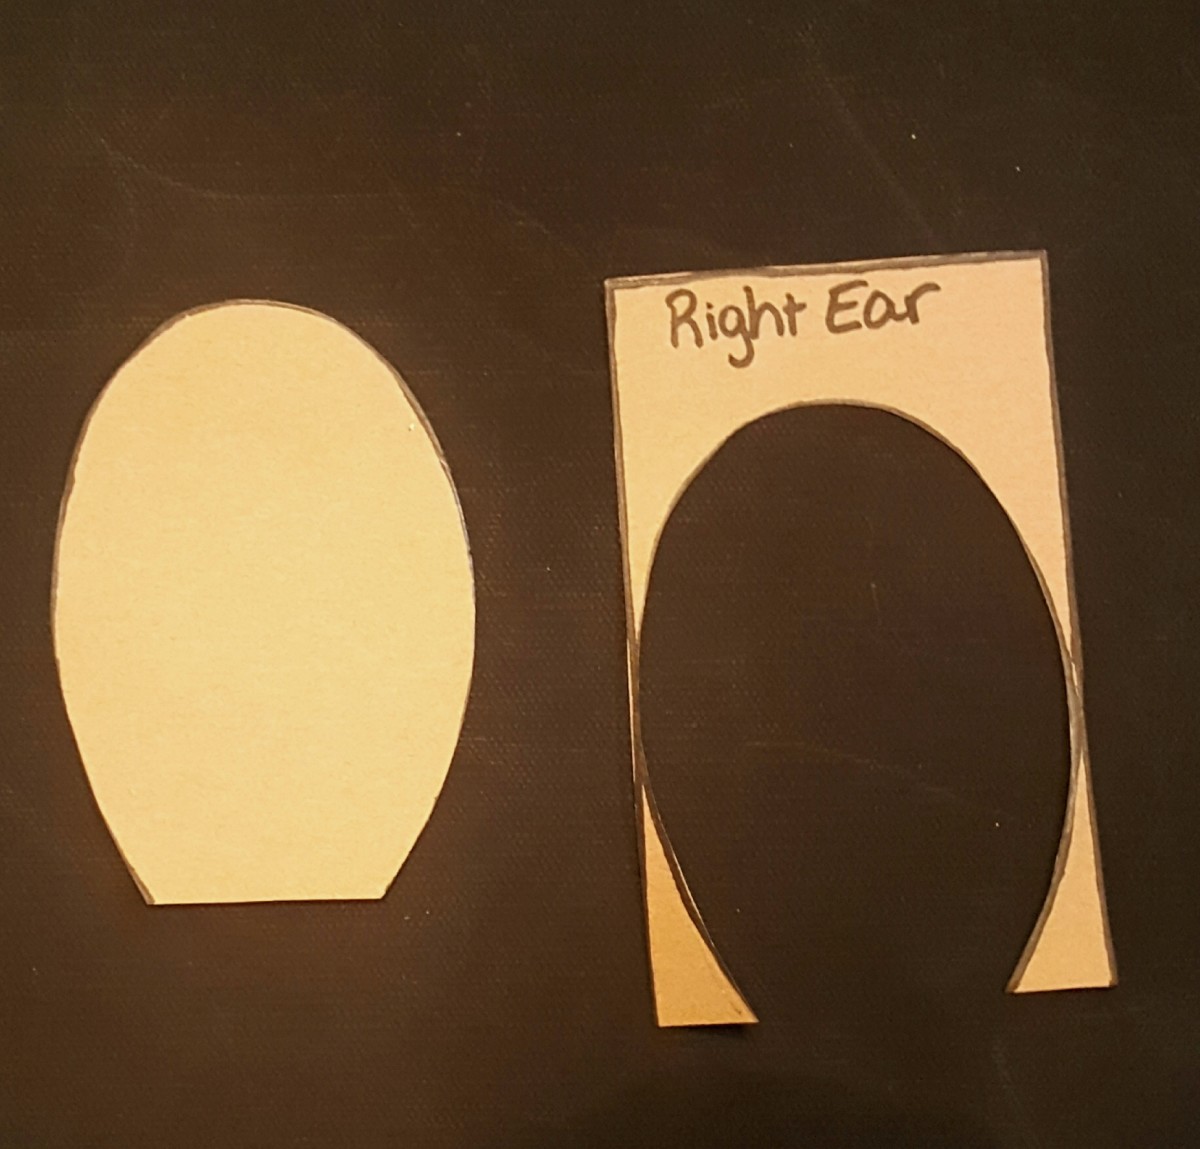 Right ear cut-out